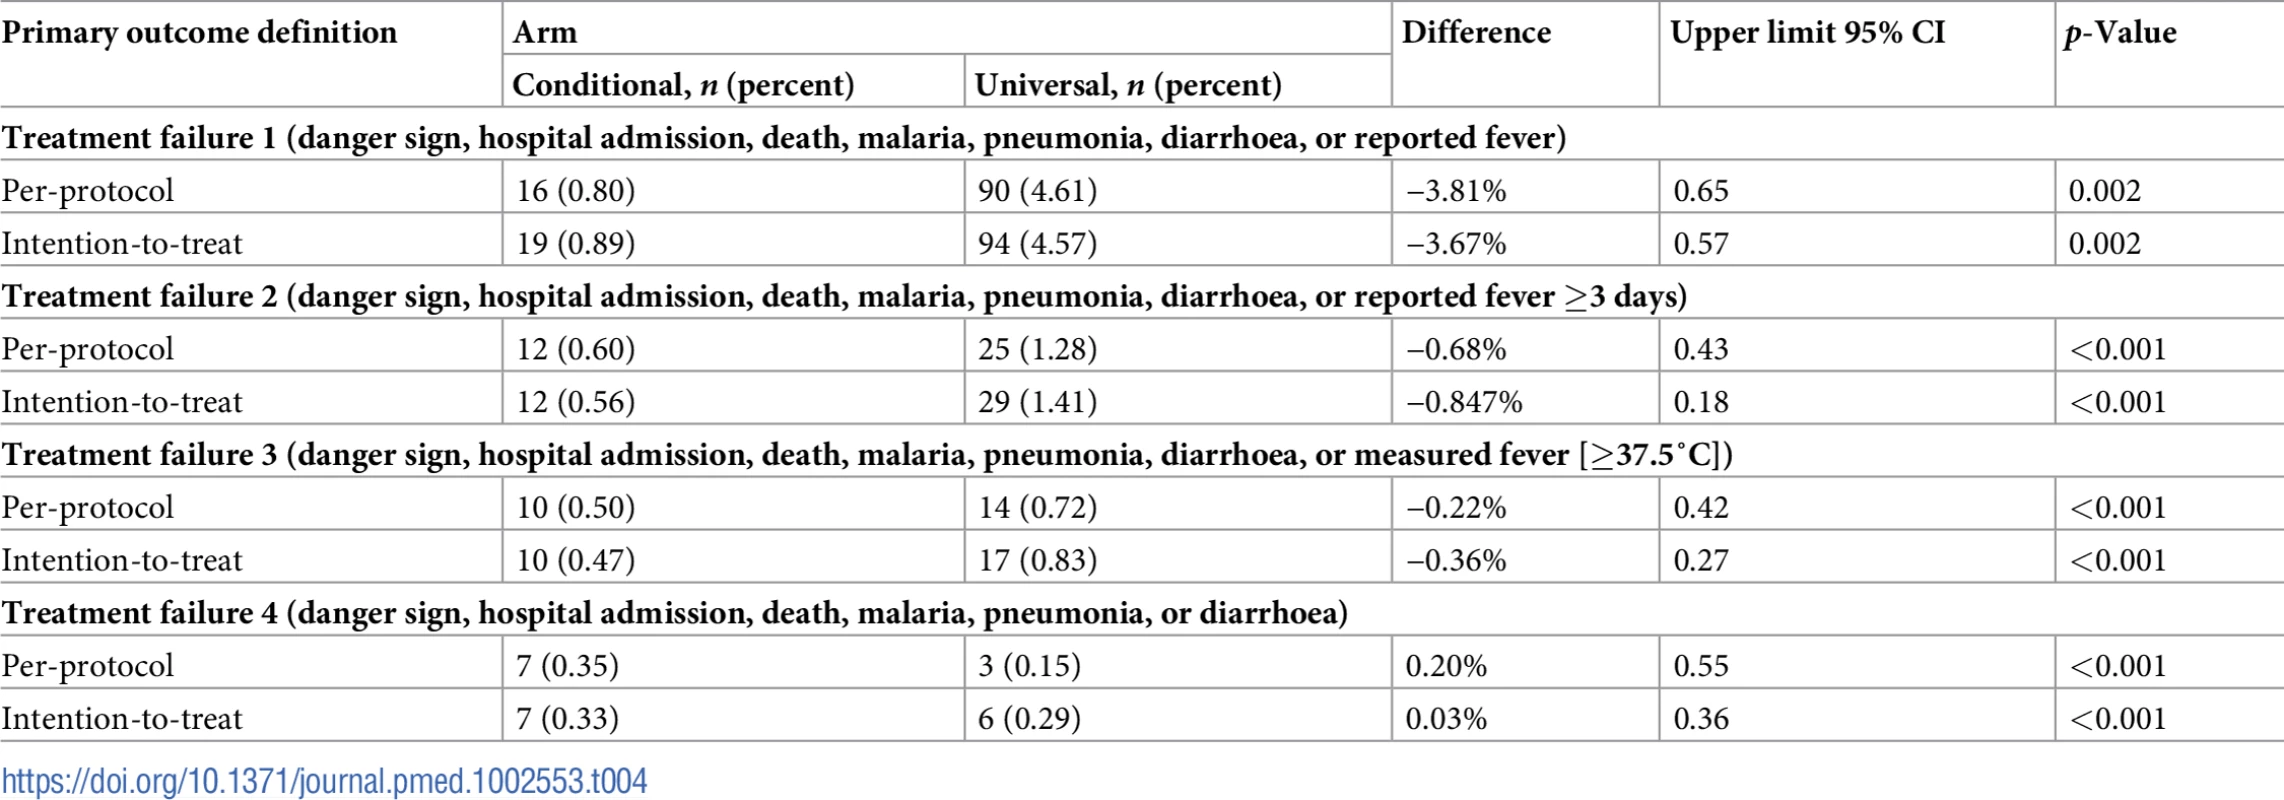 Comparison of the primary outcome, treatment failure at 1 week, between treatment arms.